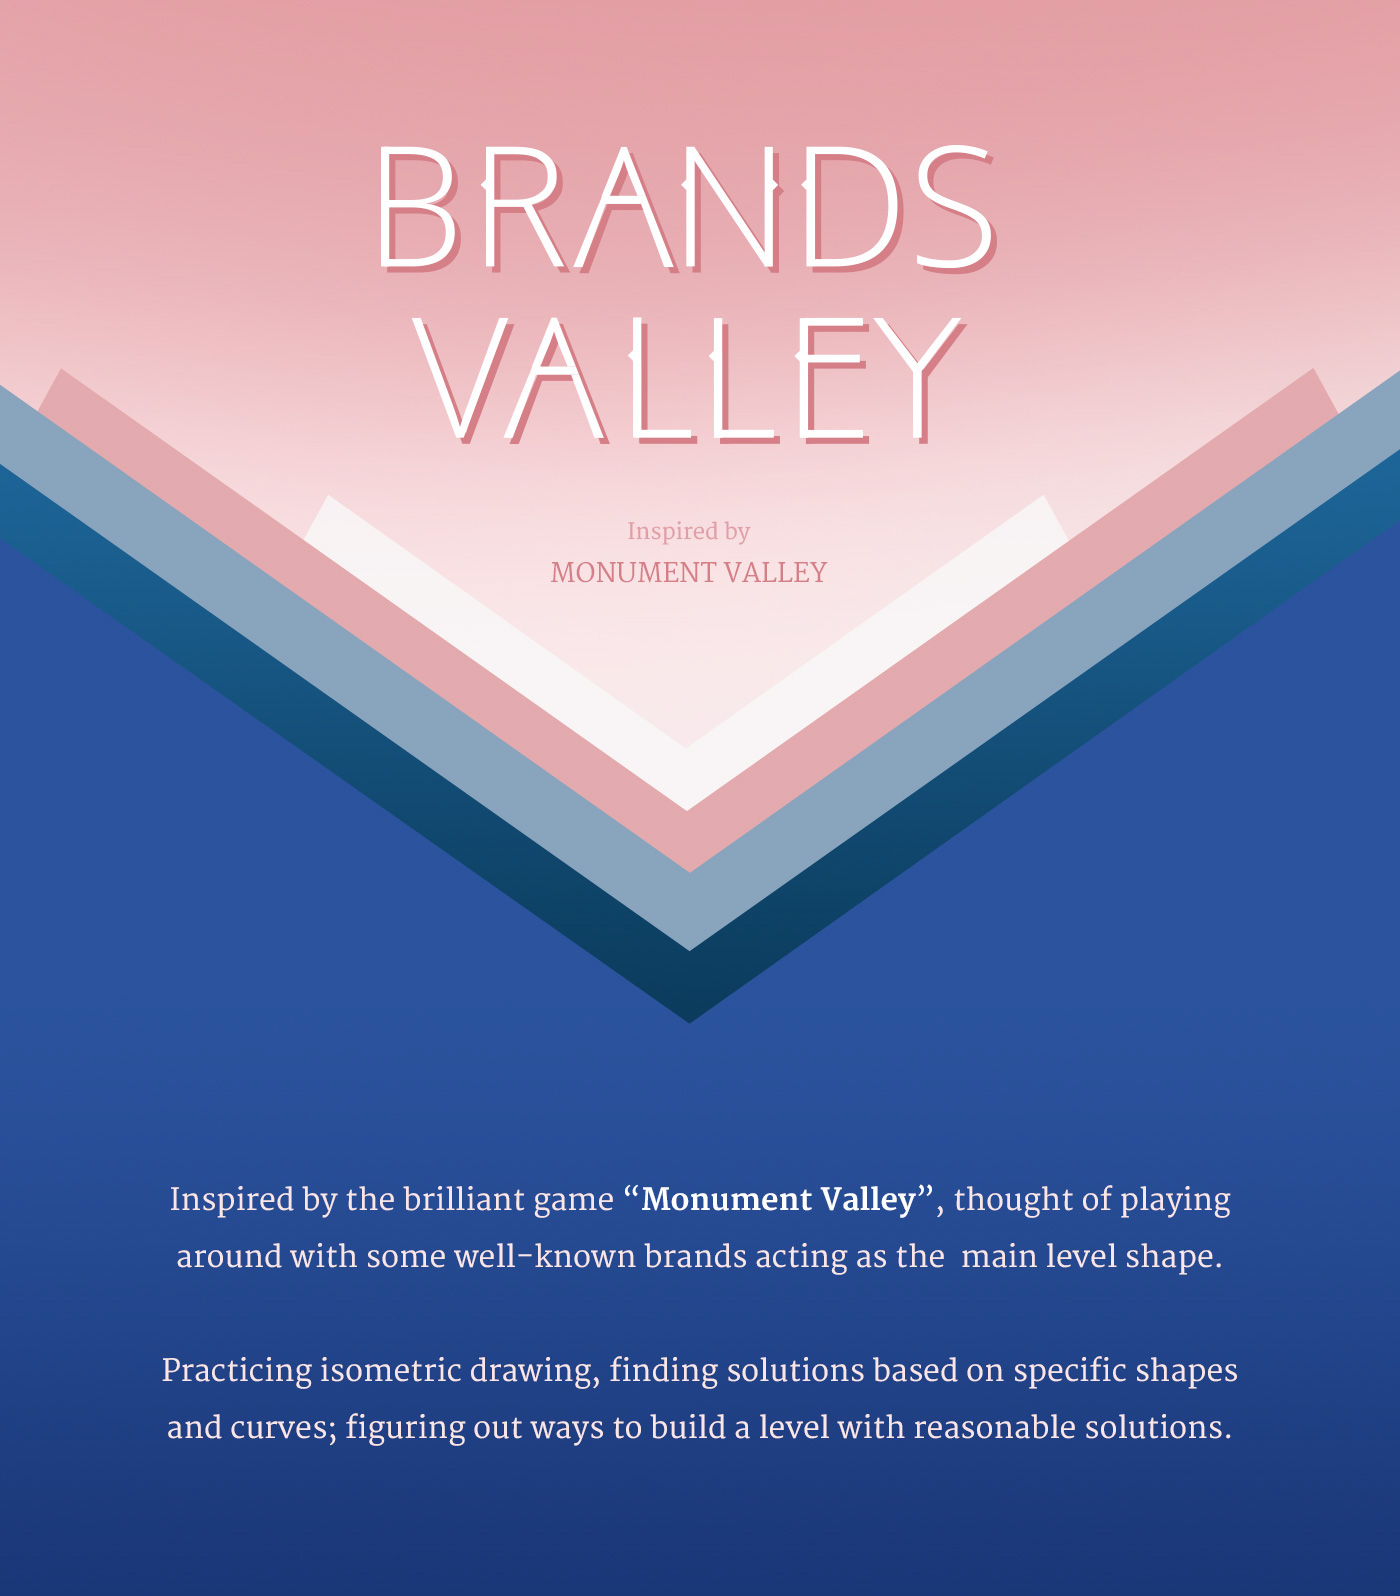 monument valley brands valley facebook Linkedin youtube Behance Isometric geometric oscar triangle